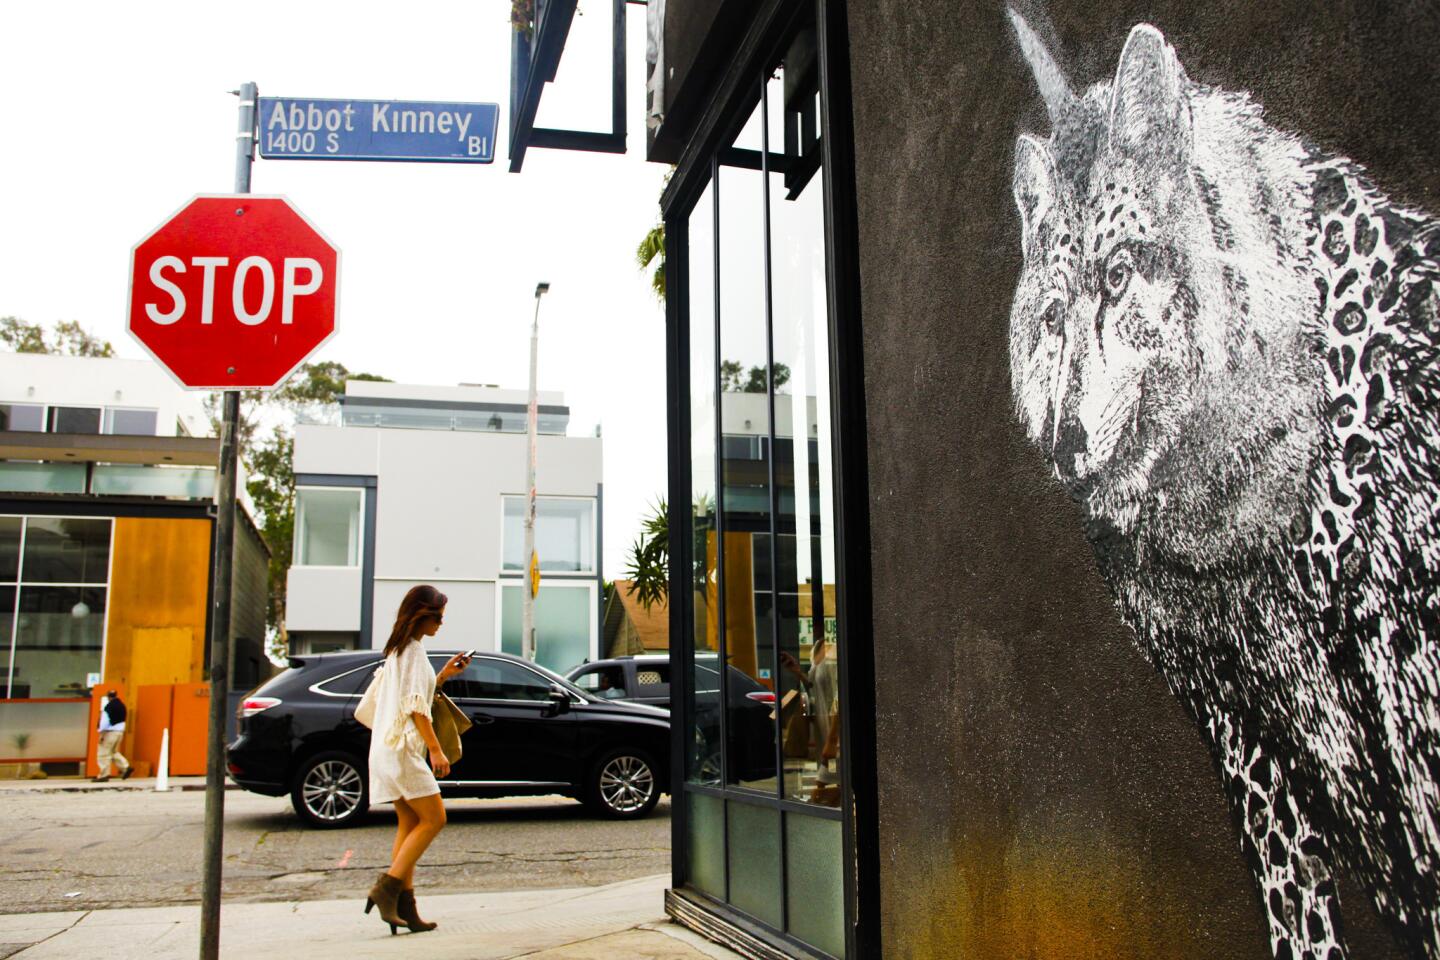 A woman walks past street art on Abbot Kinney in Venice. Over recent decades the street has increasingly attracted tony stores and restaurants that are drawing tourists from around the world but are pushing out some longtime residents and businesses.